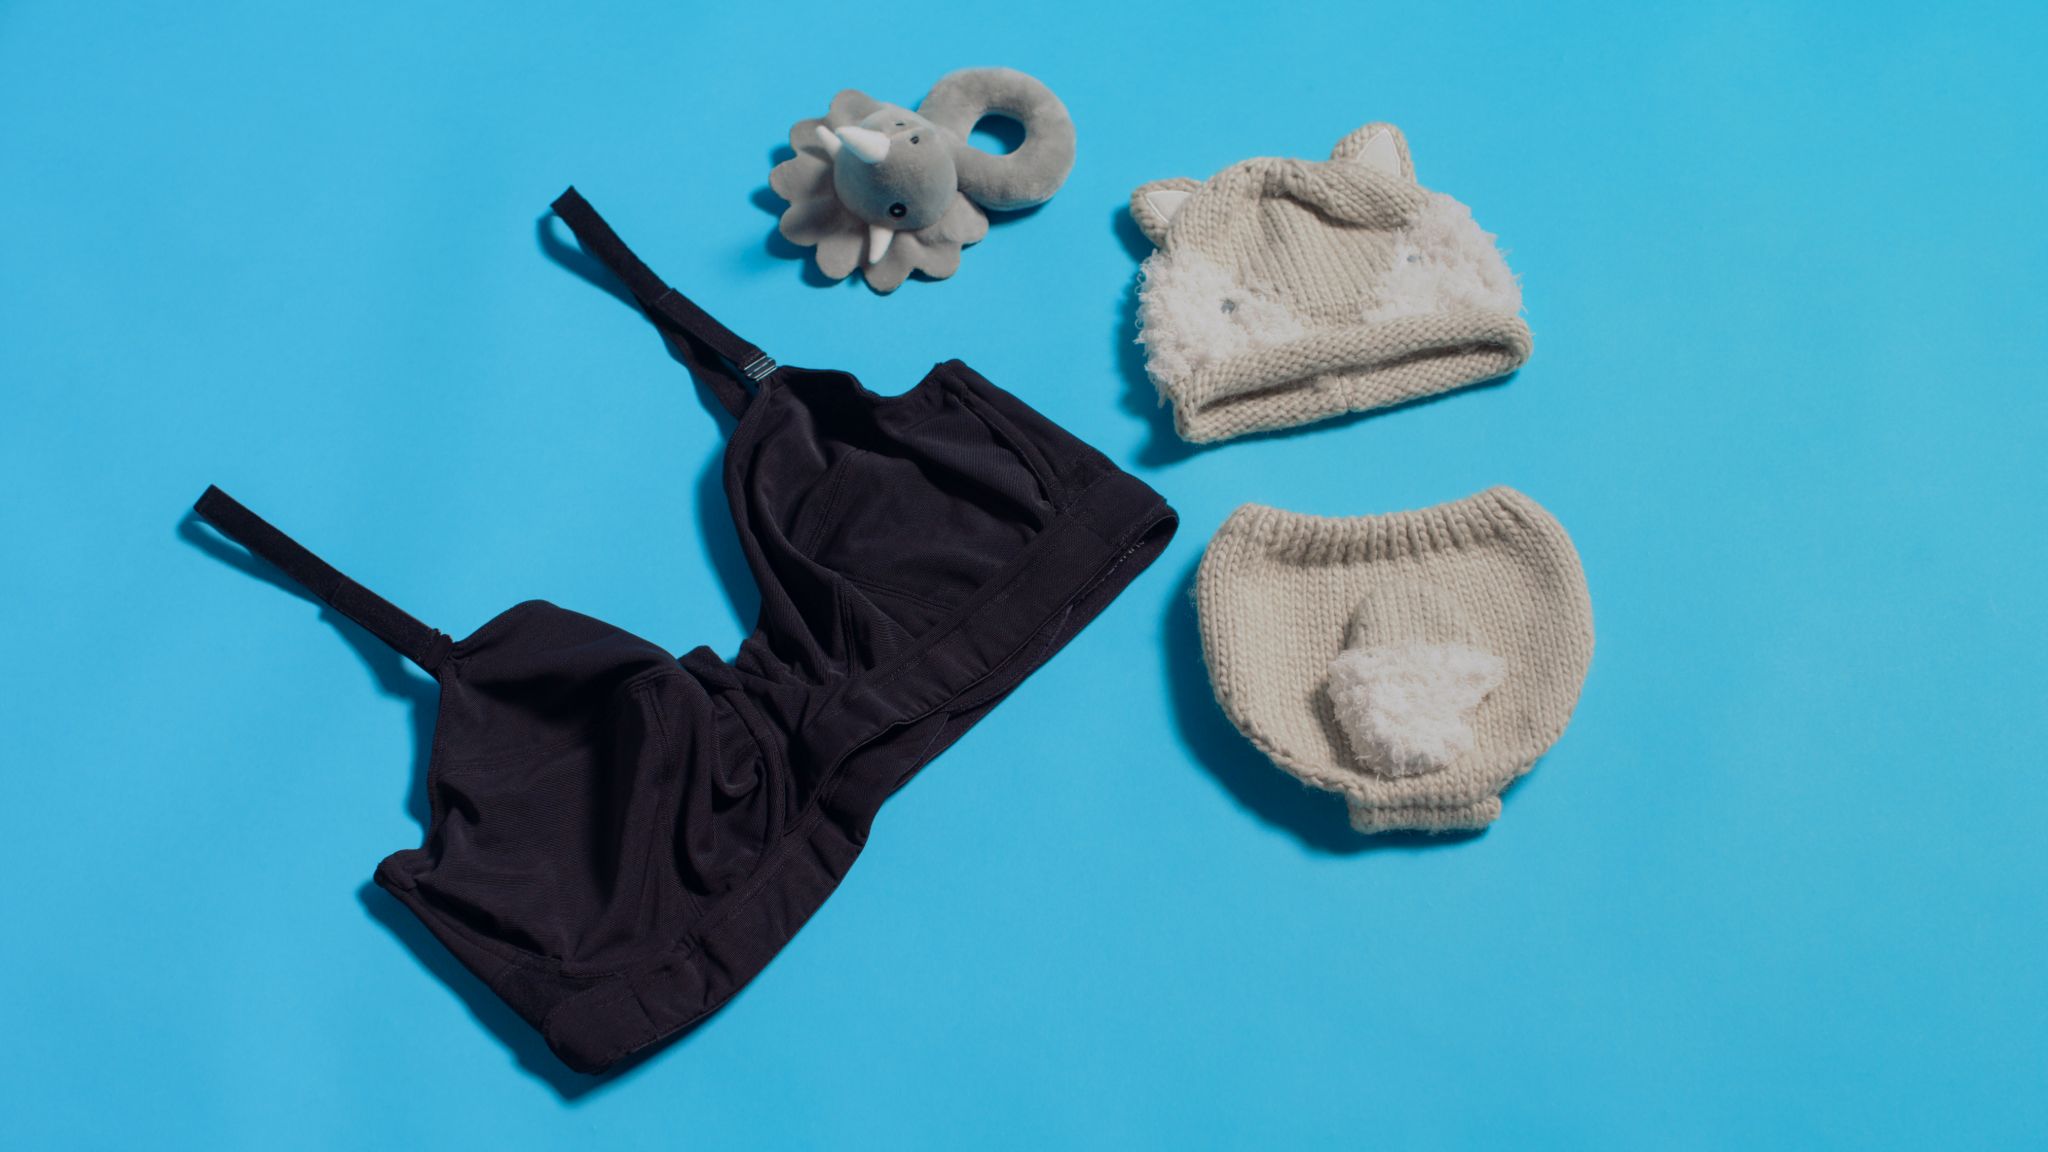 JENNAbra Product Flatlays Black bra on display with two gray knitted hats and gray plush toy